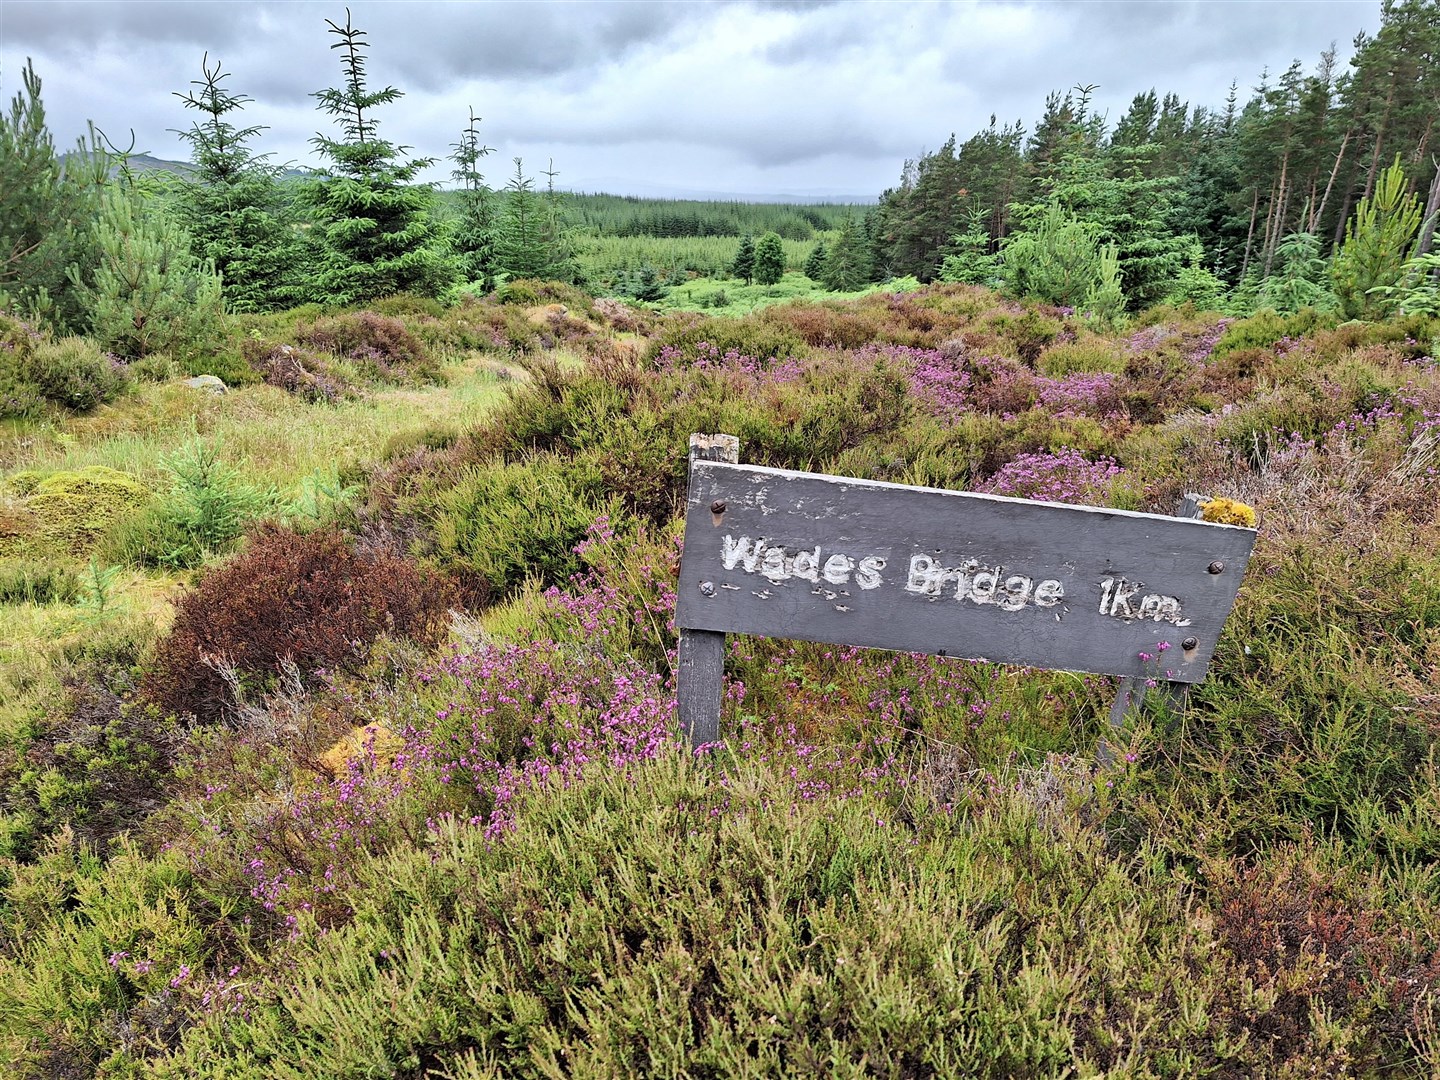 An old wooden sign leads to Wade’s bridge on the old military road between Moy and Inverness.